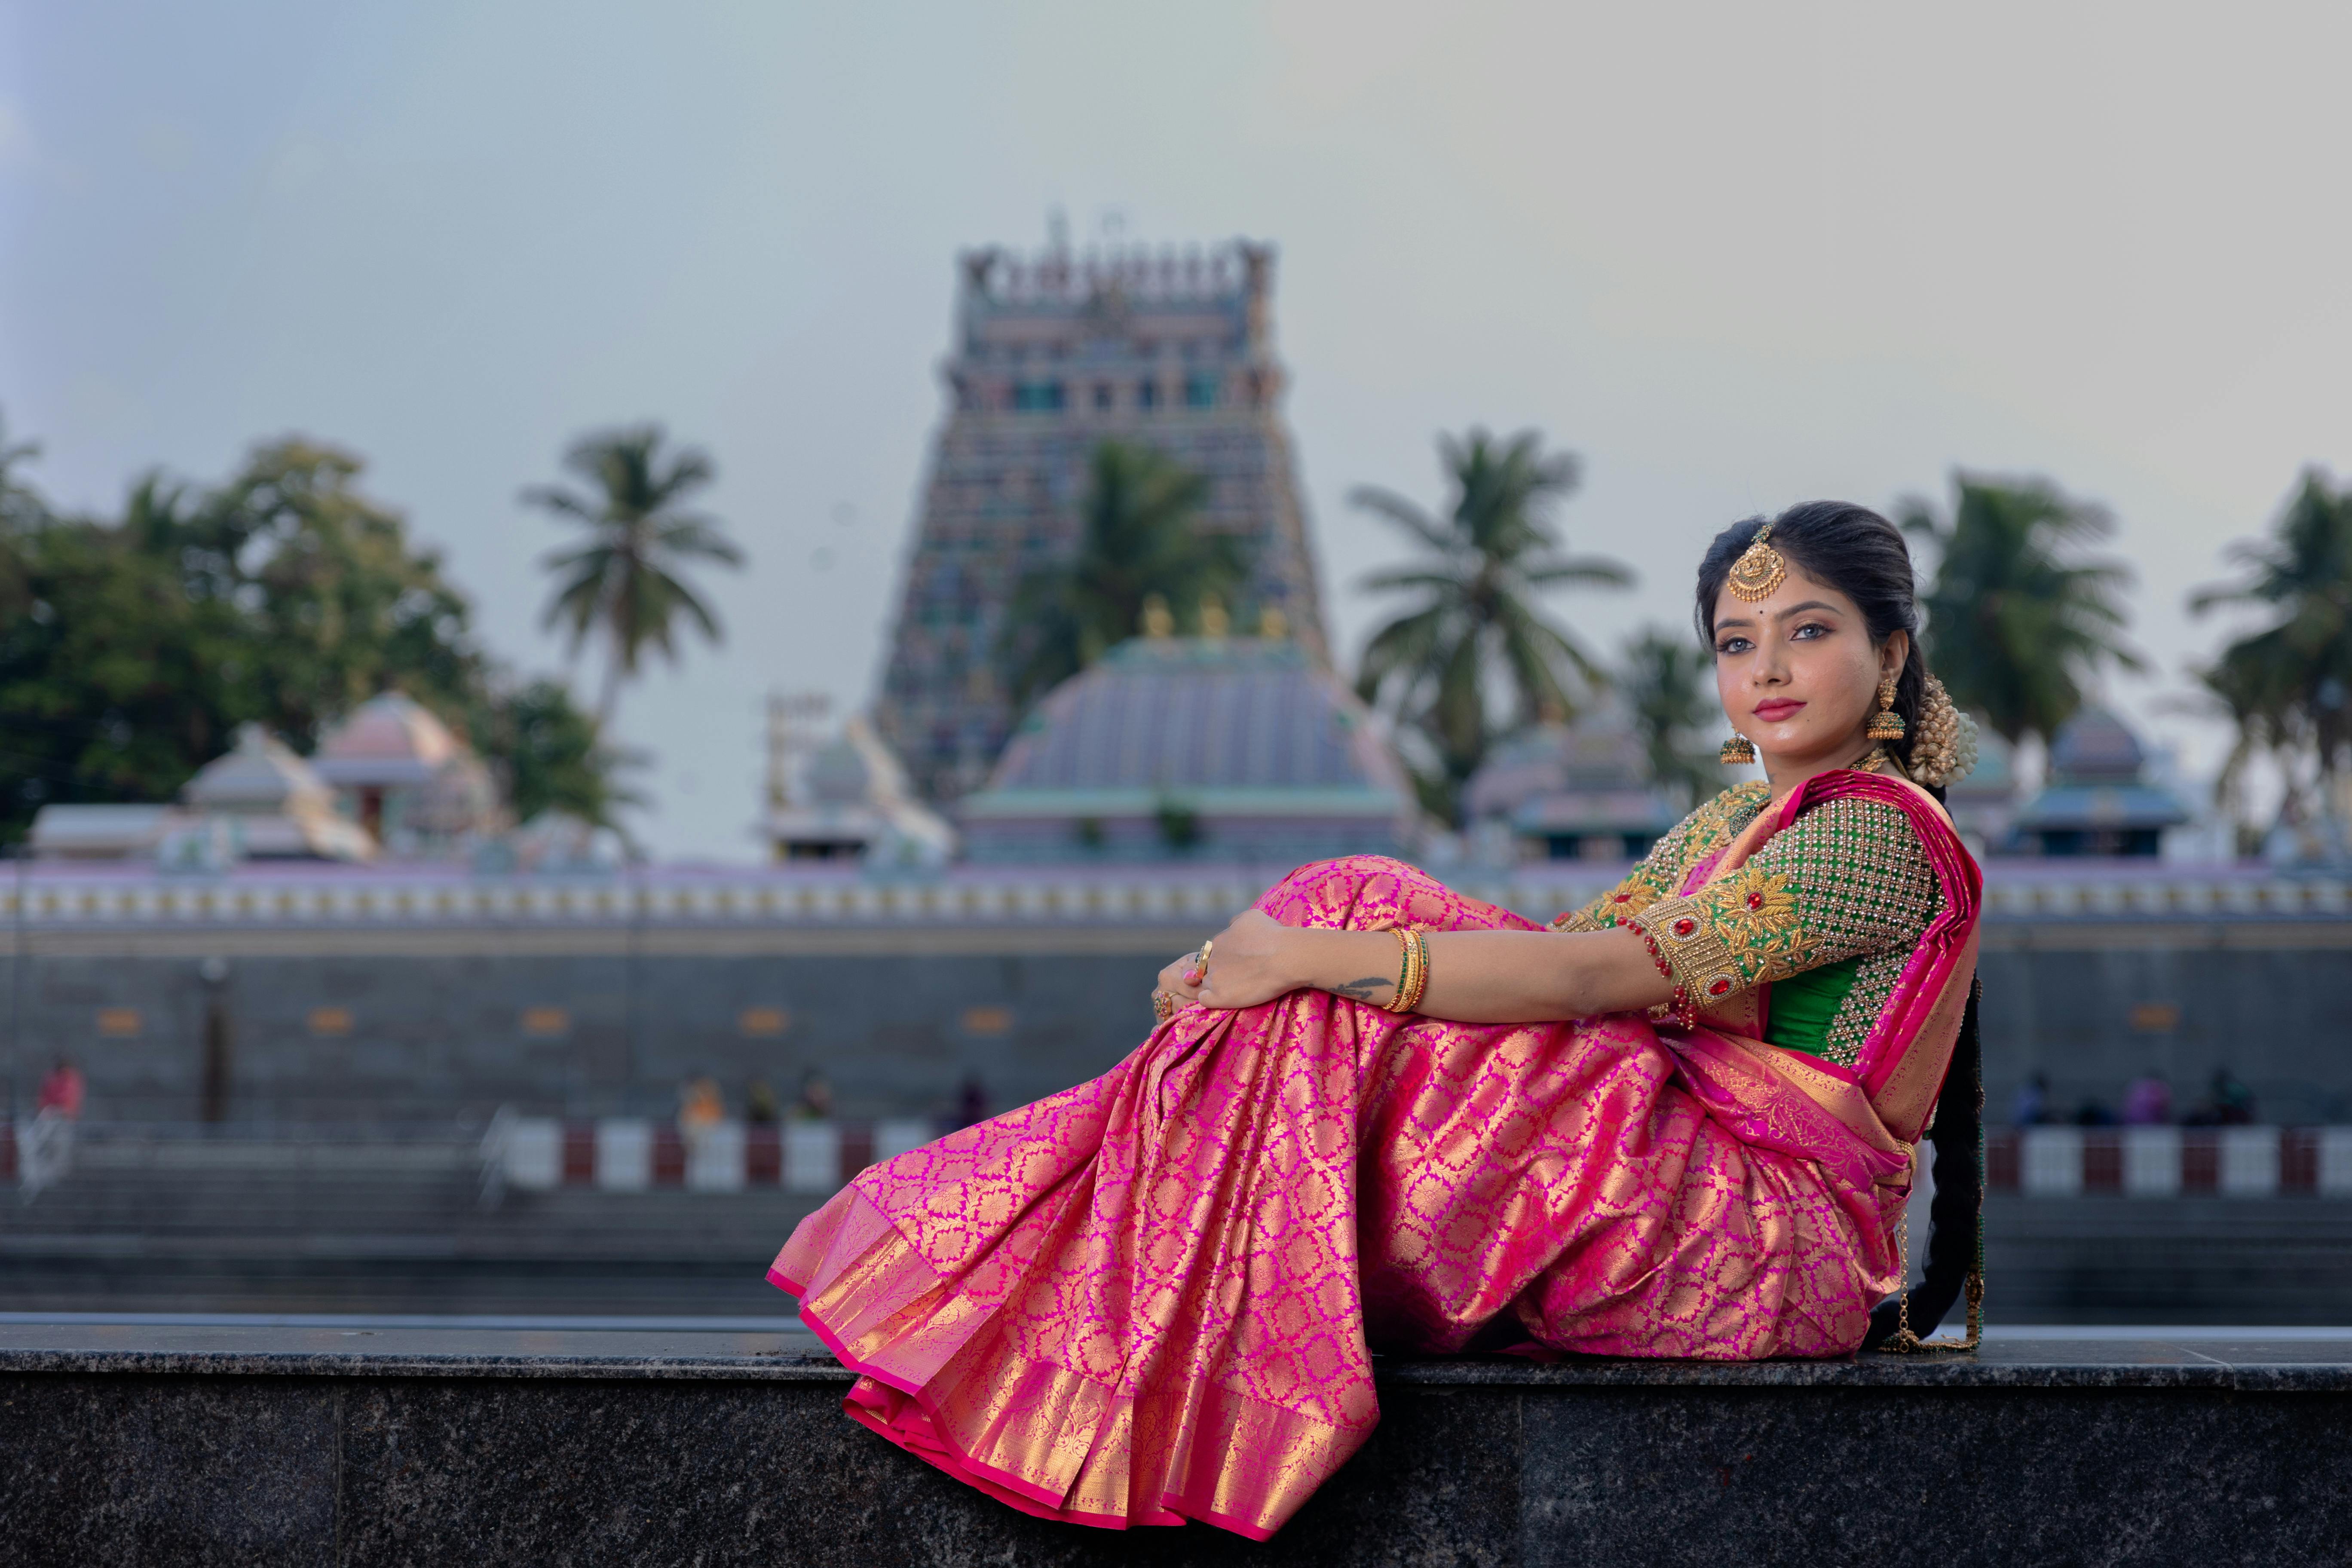 free photo of young woman in a traditional pink saree dress posing outside